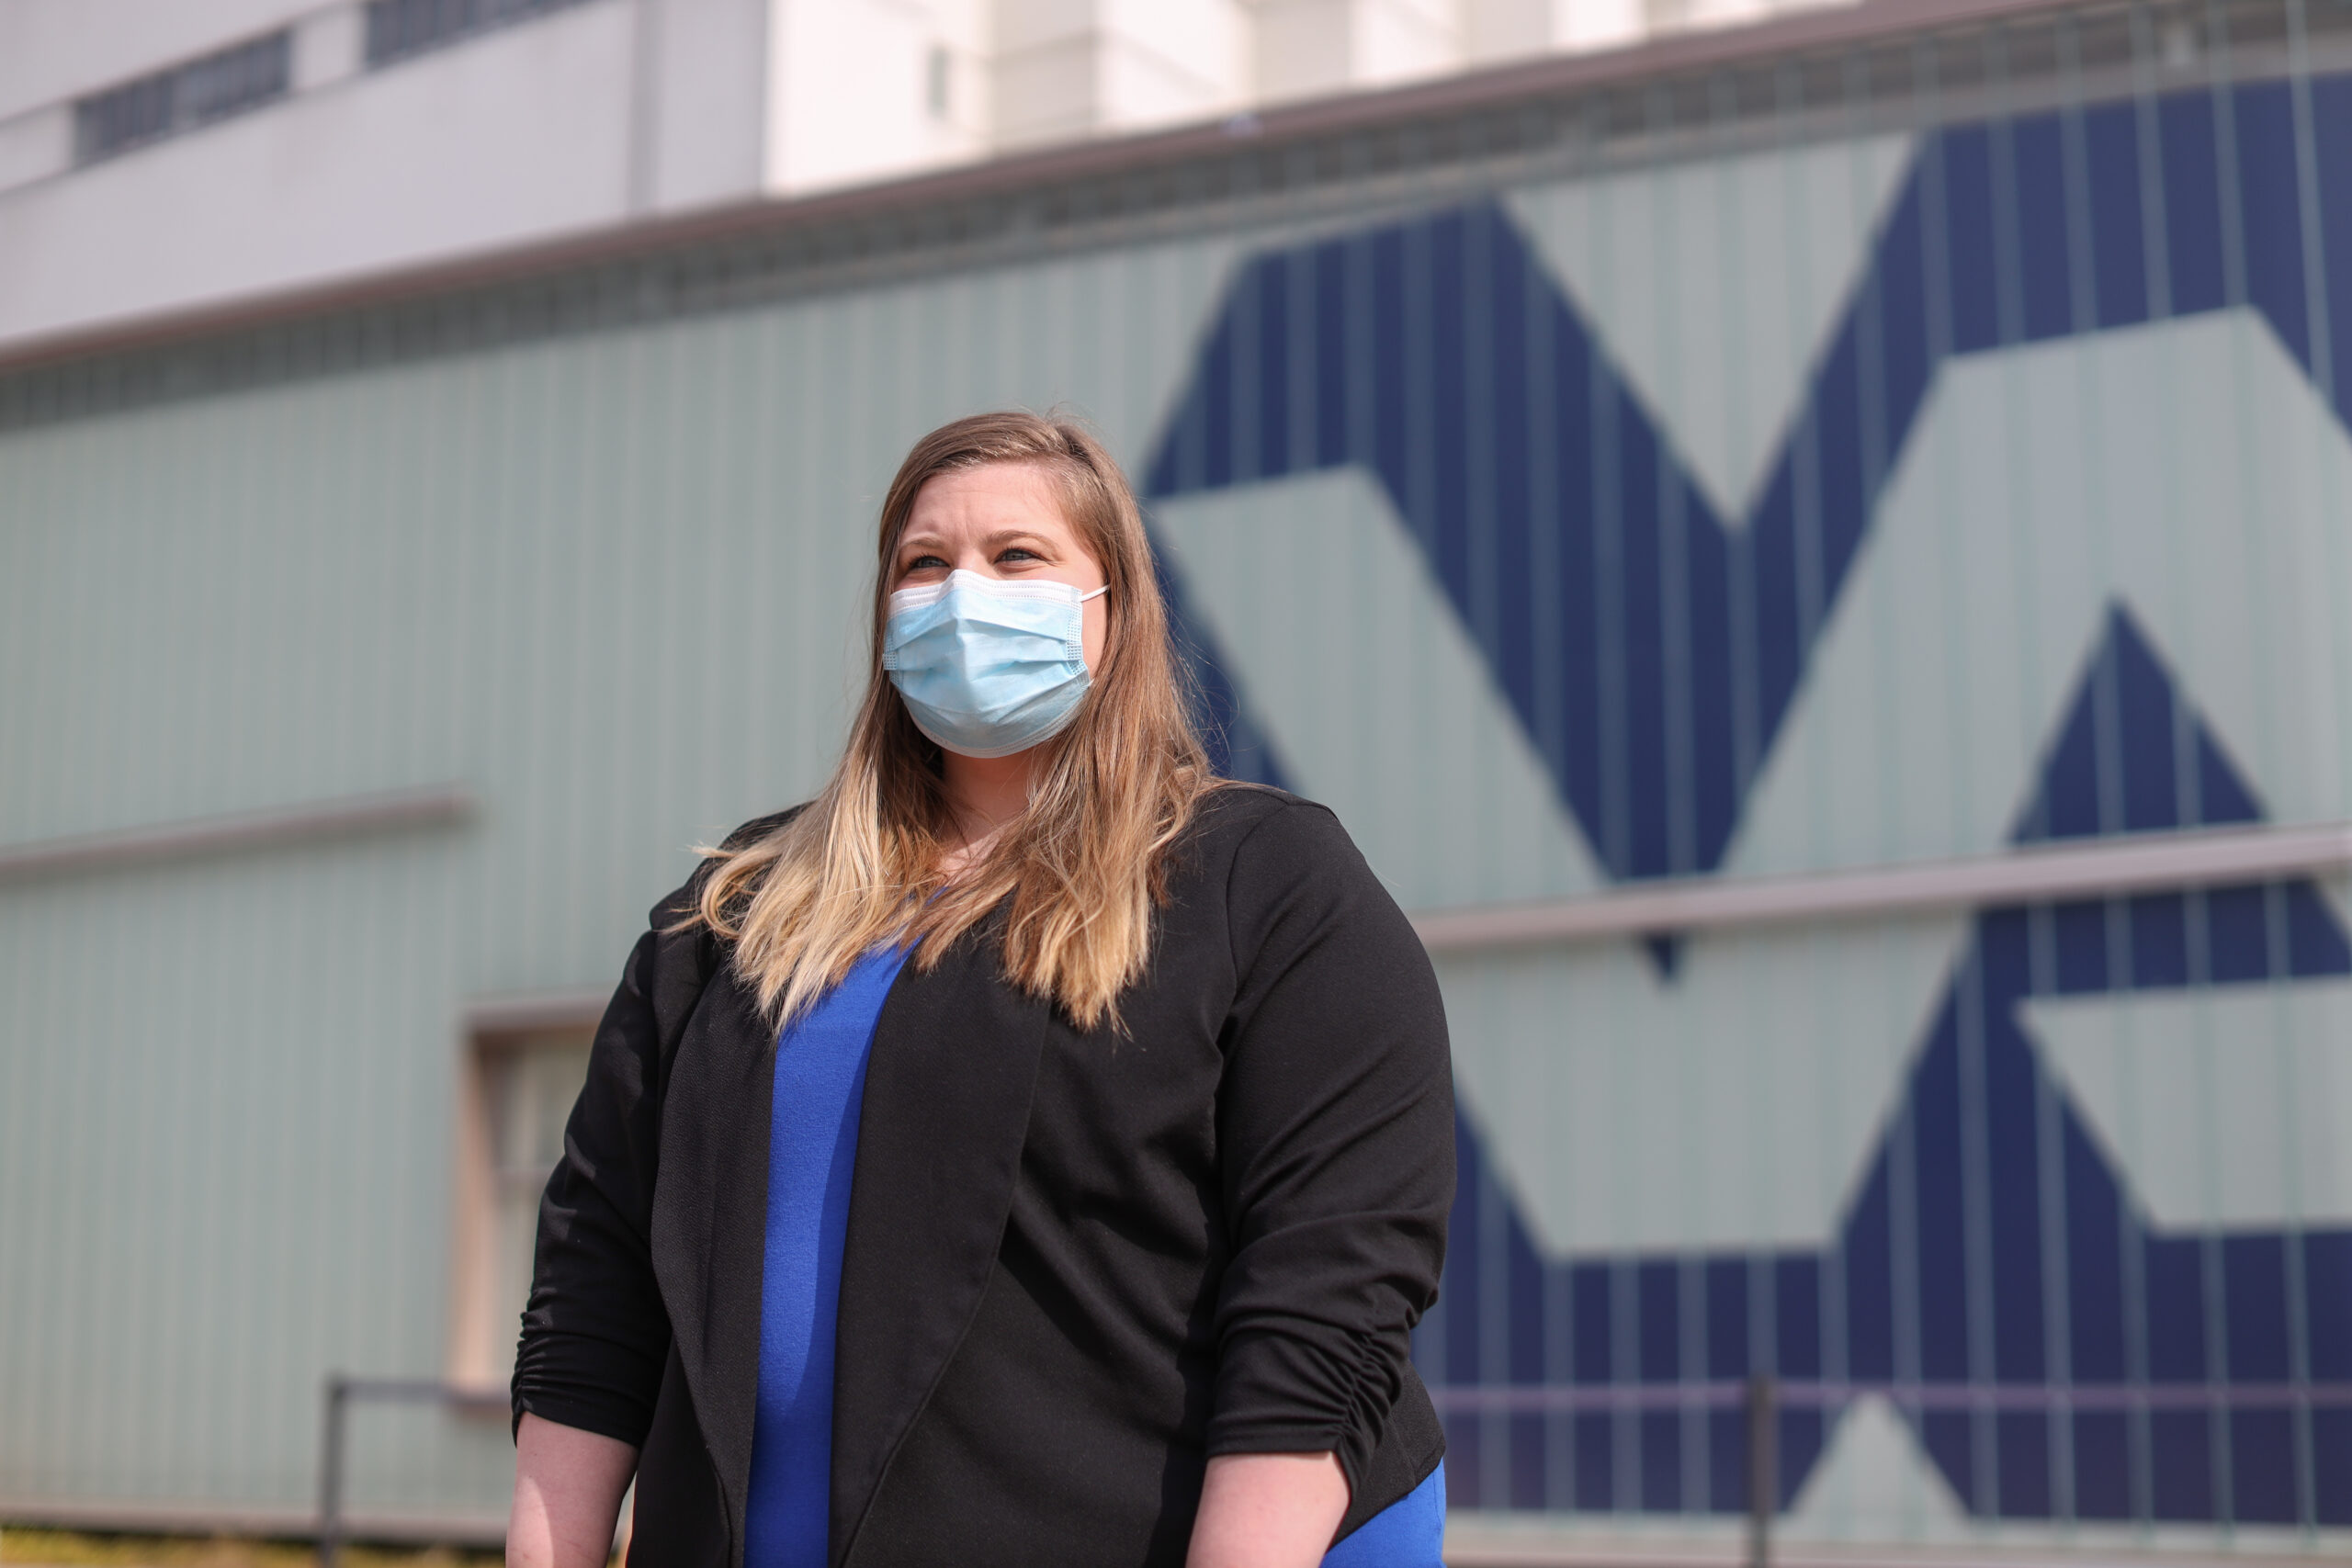 http://Katherine%20wearing%20a%20black%20sweater%20and%20blue%20shirt,%20and%20wearing%20a%20face%20mask%20standing%20outside%20with%20a%20building%20behind%20her